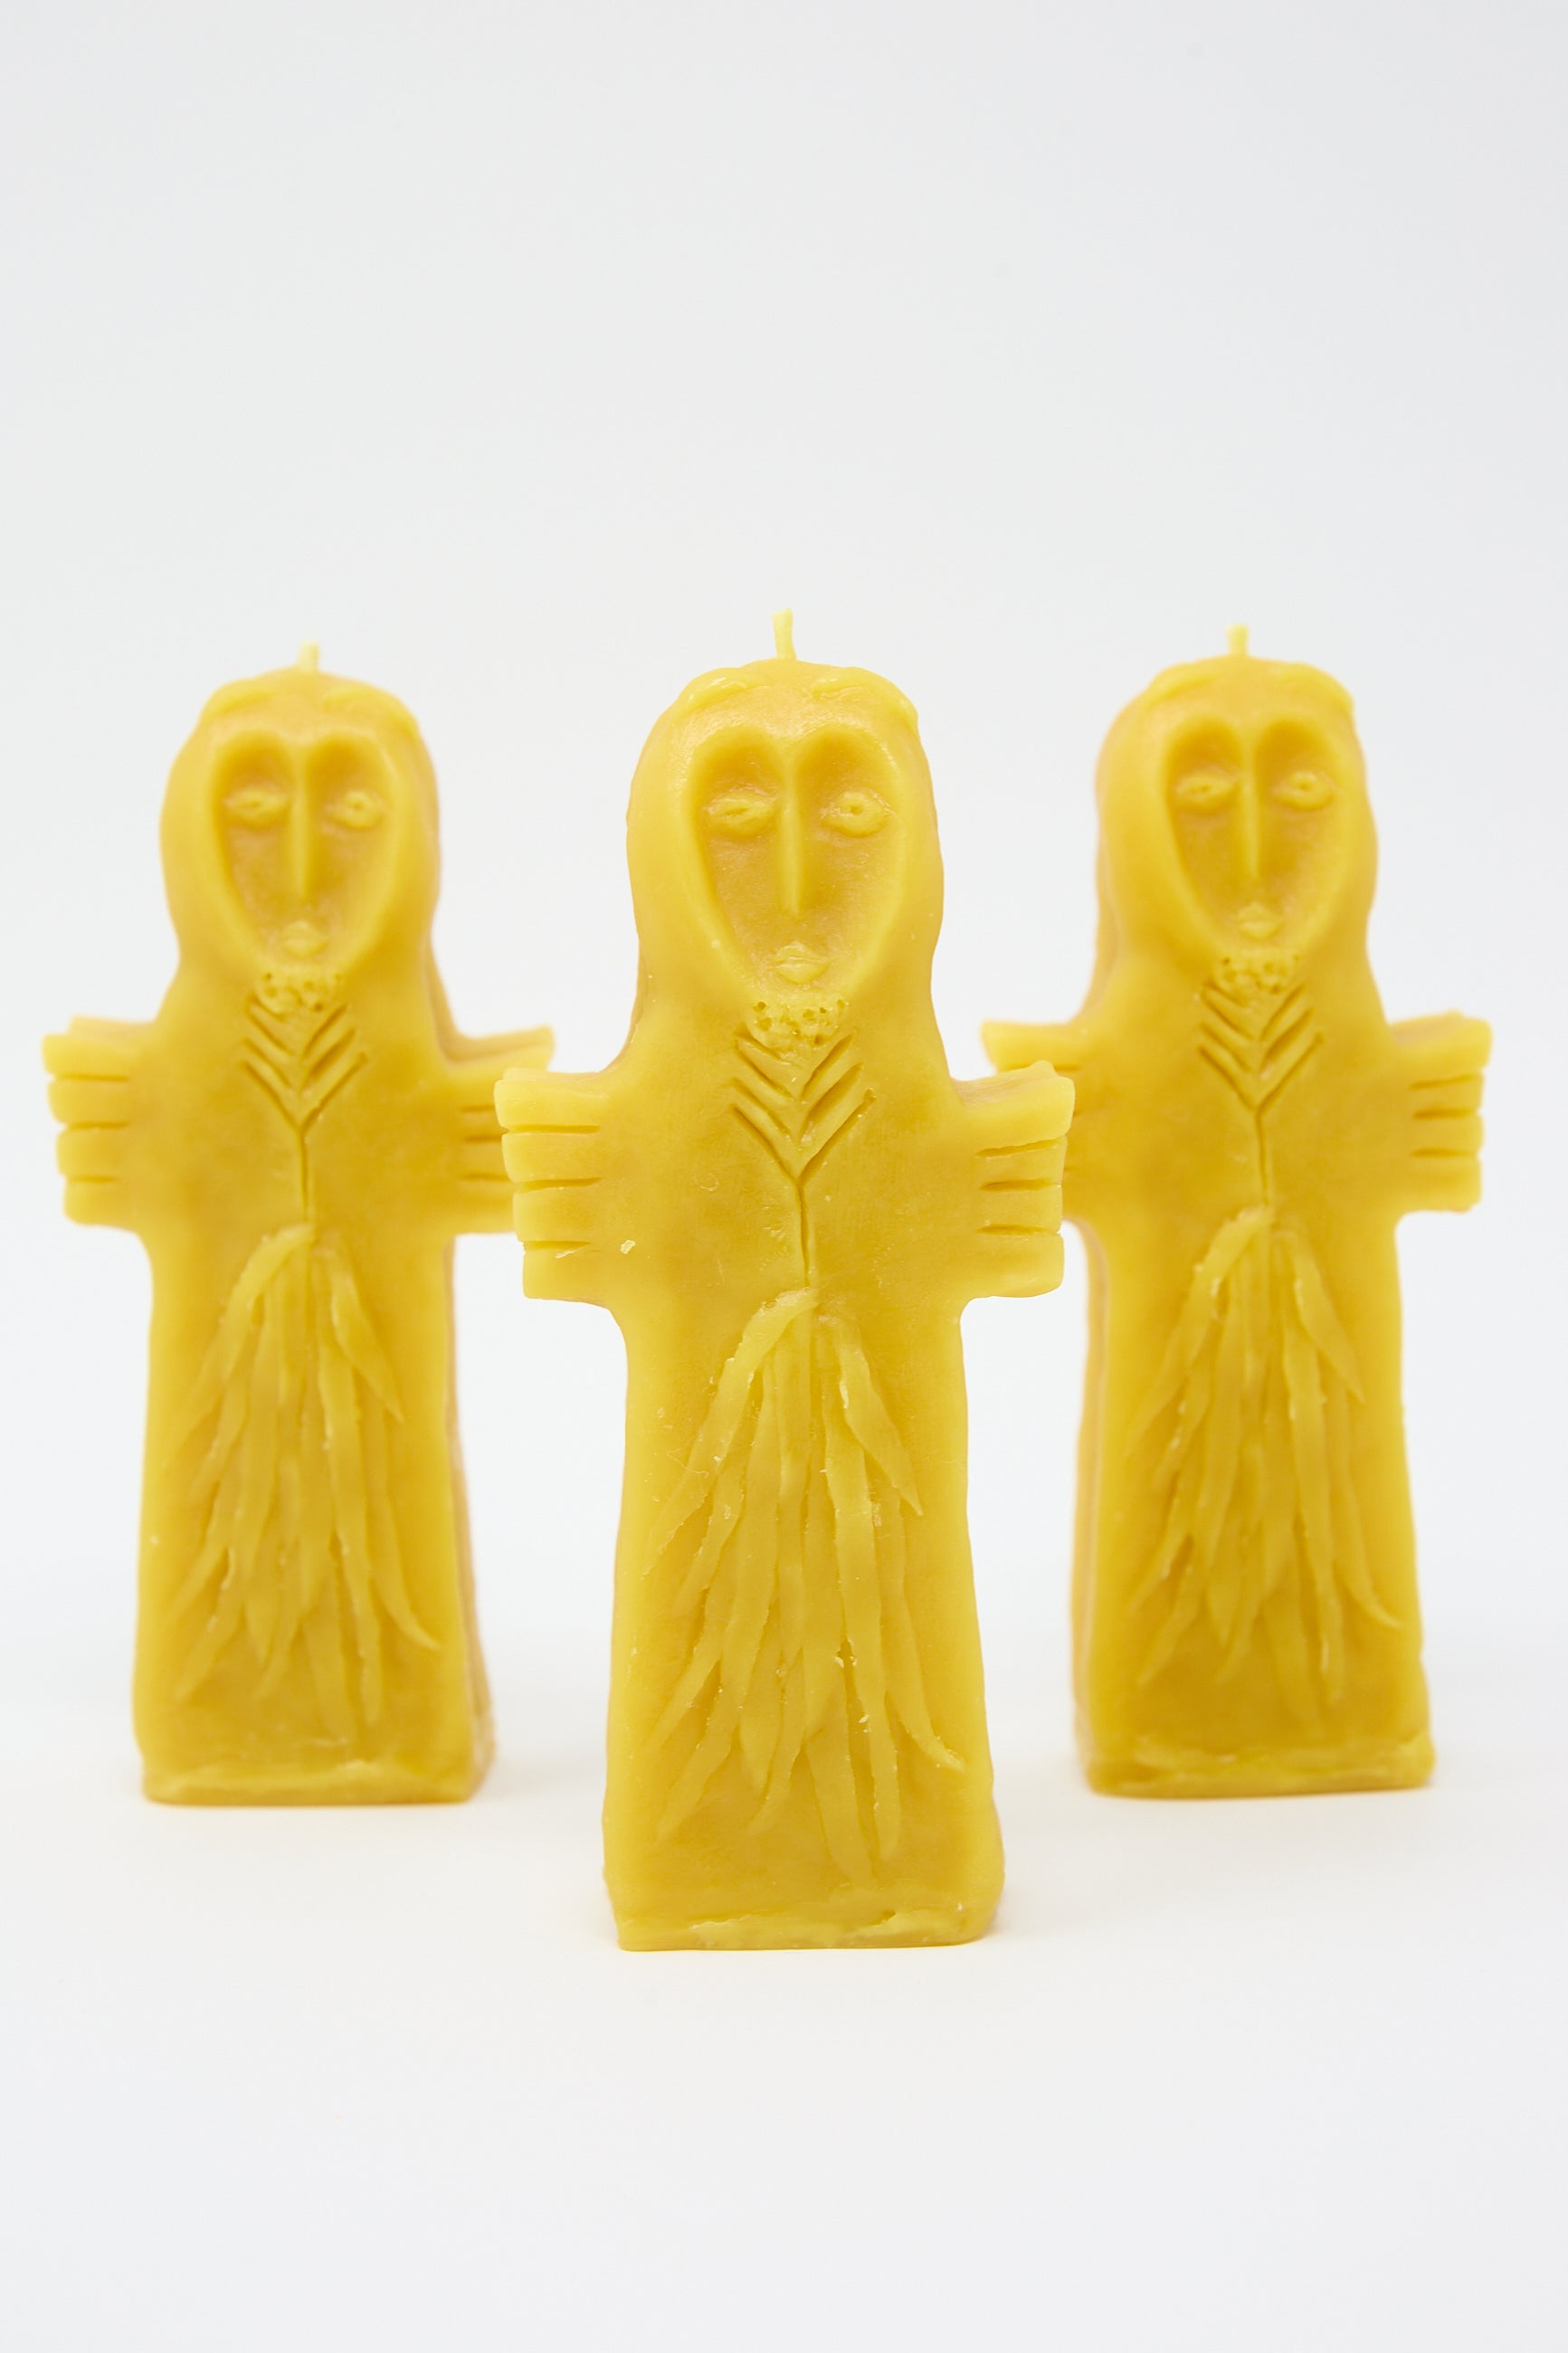 Three yellow Sky Goddess Candles from Rinn to Hitsuji, shaped like figures with cloaked bodies and serene facial expressions, standing upright against a white background.